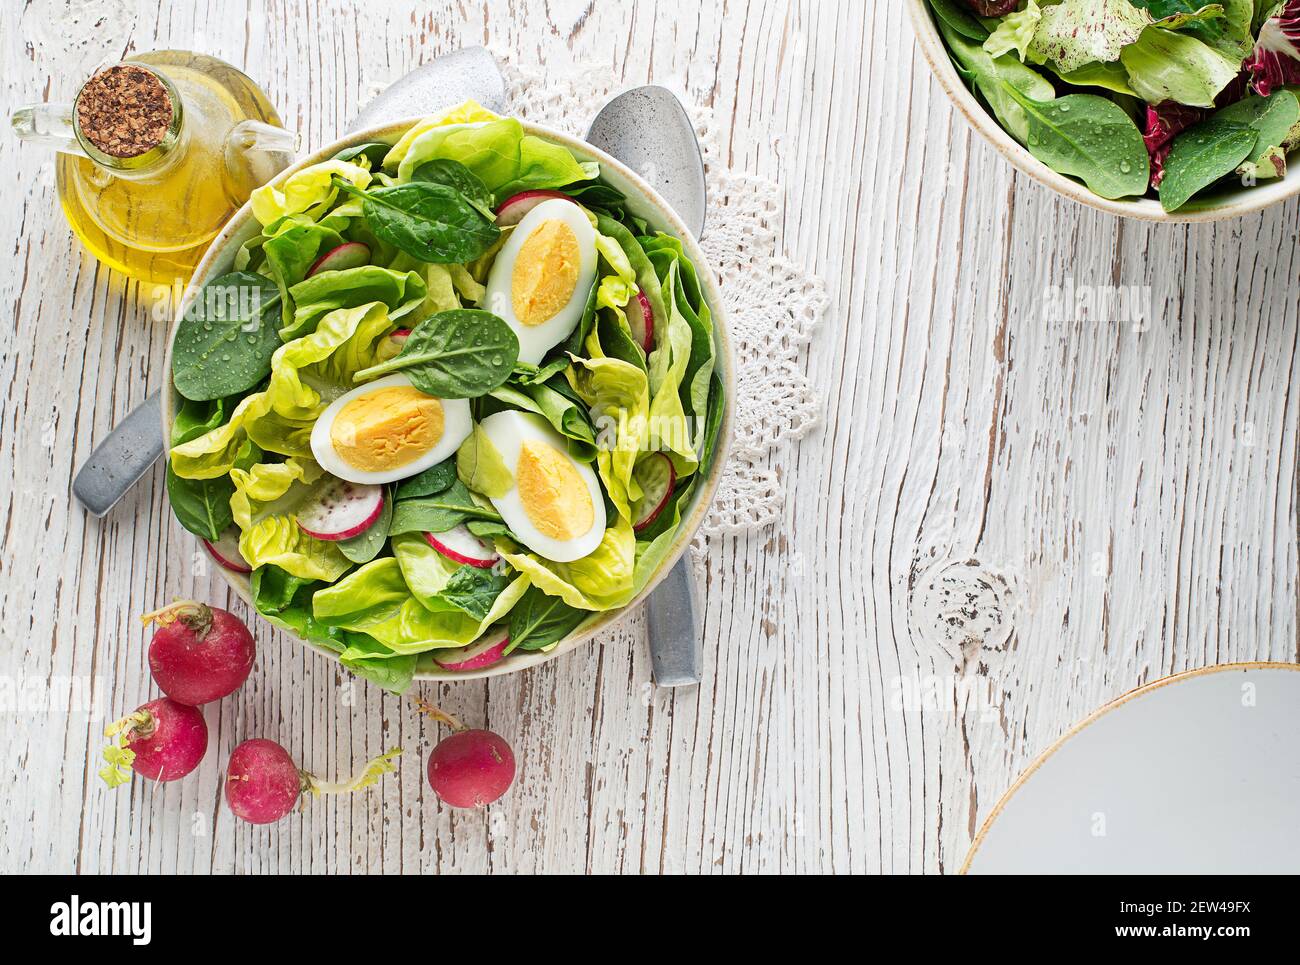 Healthy green salad with egg on wooden table background. Healthy meal. Stock Photo